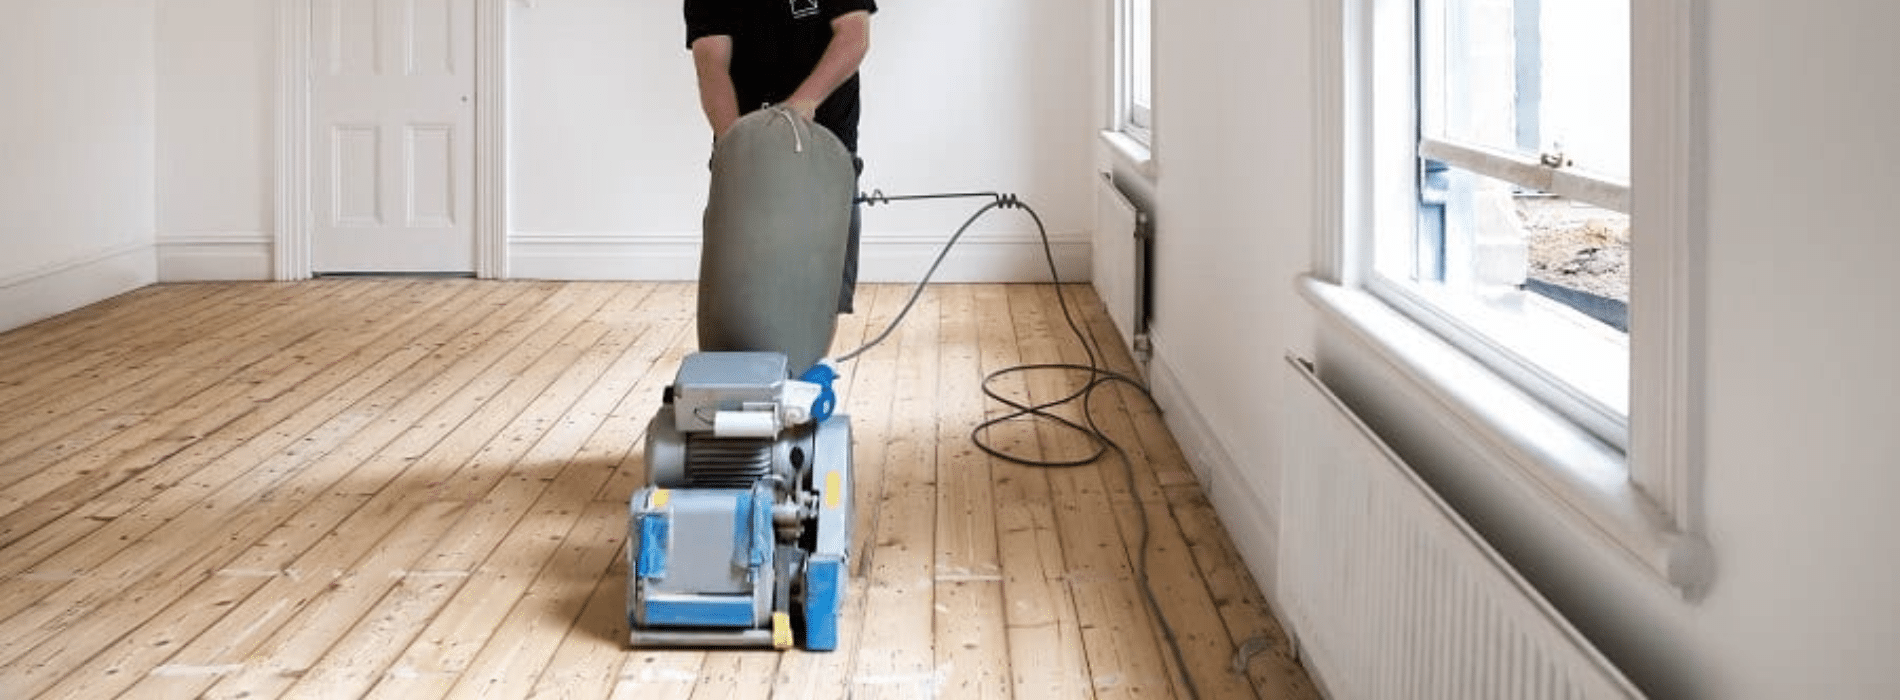 Herringbone Floor Sanding: Mr Sander® utilizing the powerful Effect 2200 belt sander for precision. Voltage: 220V, Frequency: 40Hz. Witness the clean and efficient results on a 250x650 mm herringbone floor with the HEPA-filtered dust extraction system.